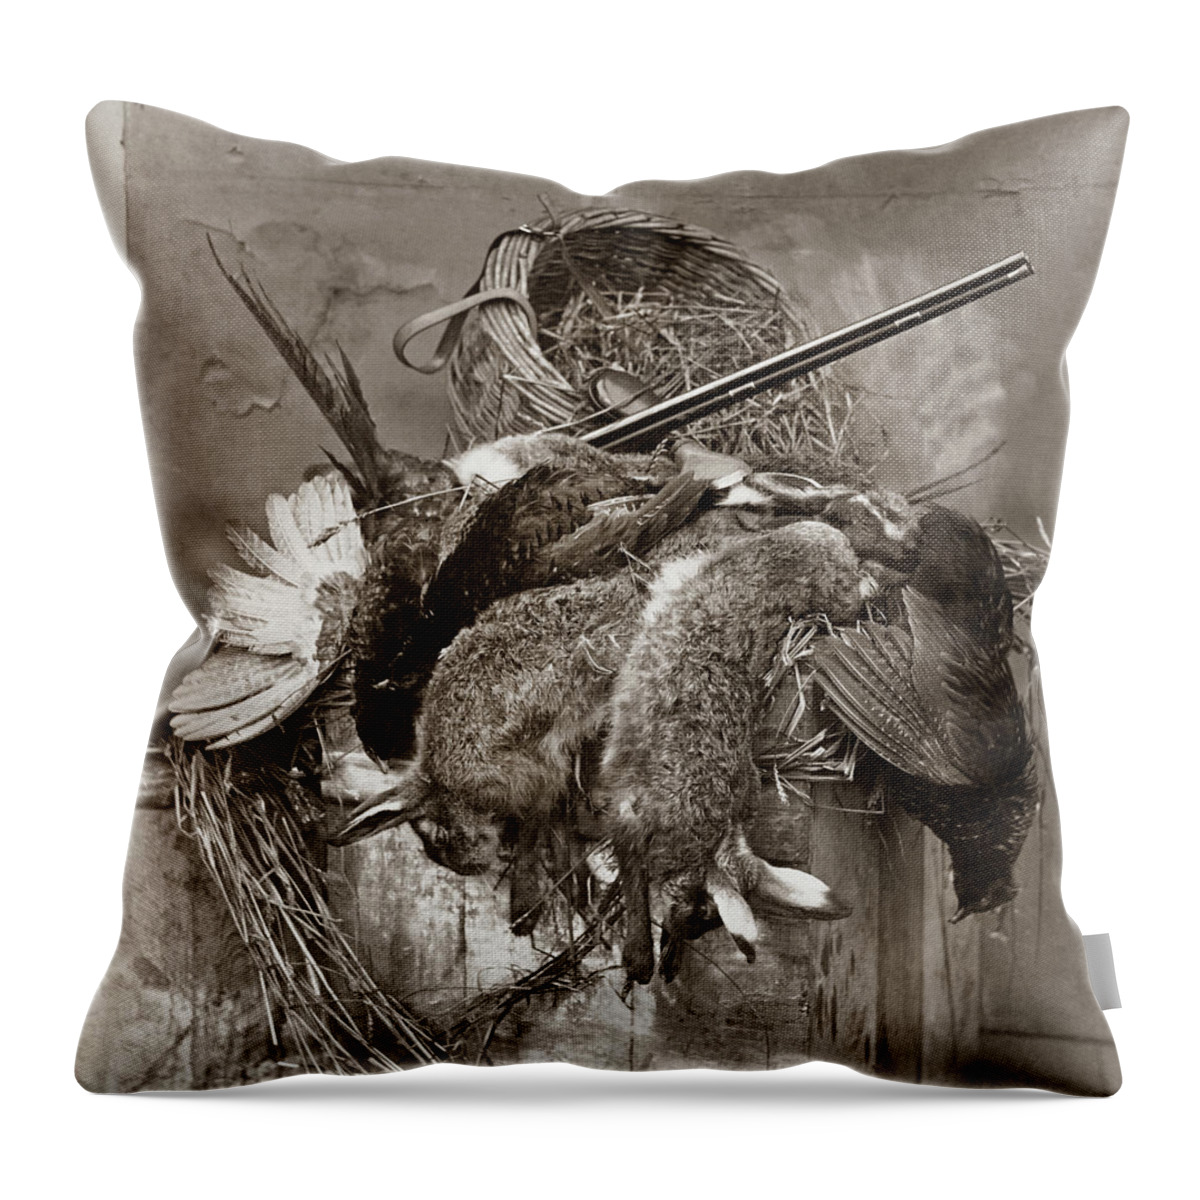 B1019 Throw Pillow featuring the photograph Still Life, C1859 by Roger Fenton